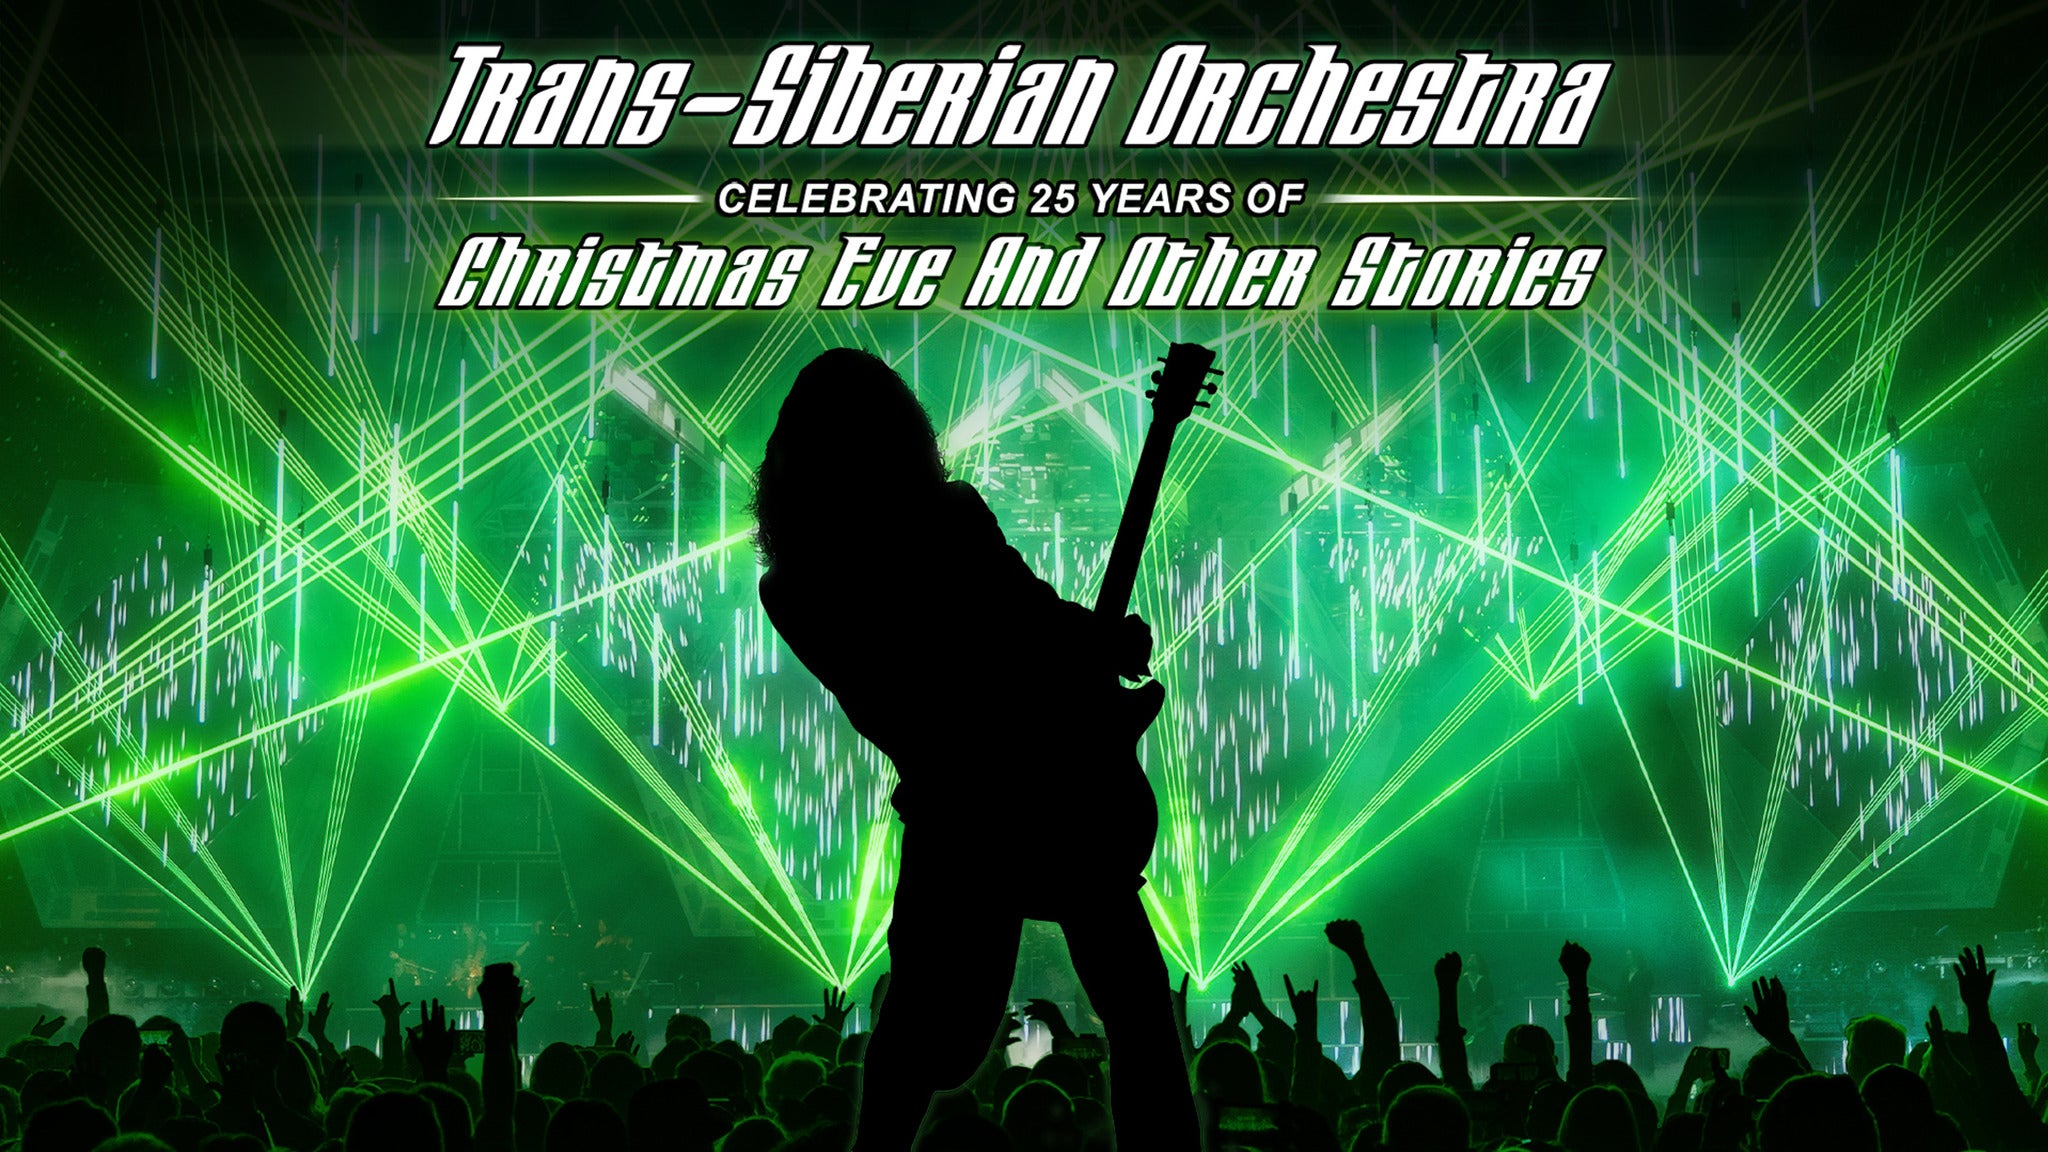 Trans-Siberian Orchestra-Christmas Eve & Other Stories in Orlando promo photo for Citi® Cardmember Preferred presale offer code